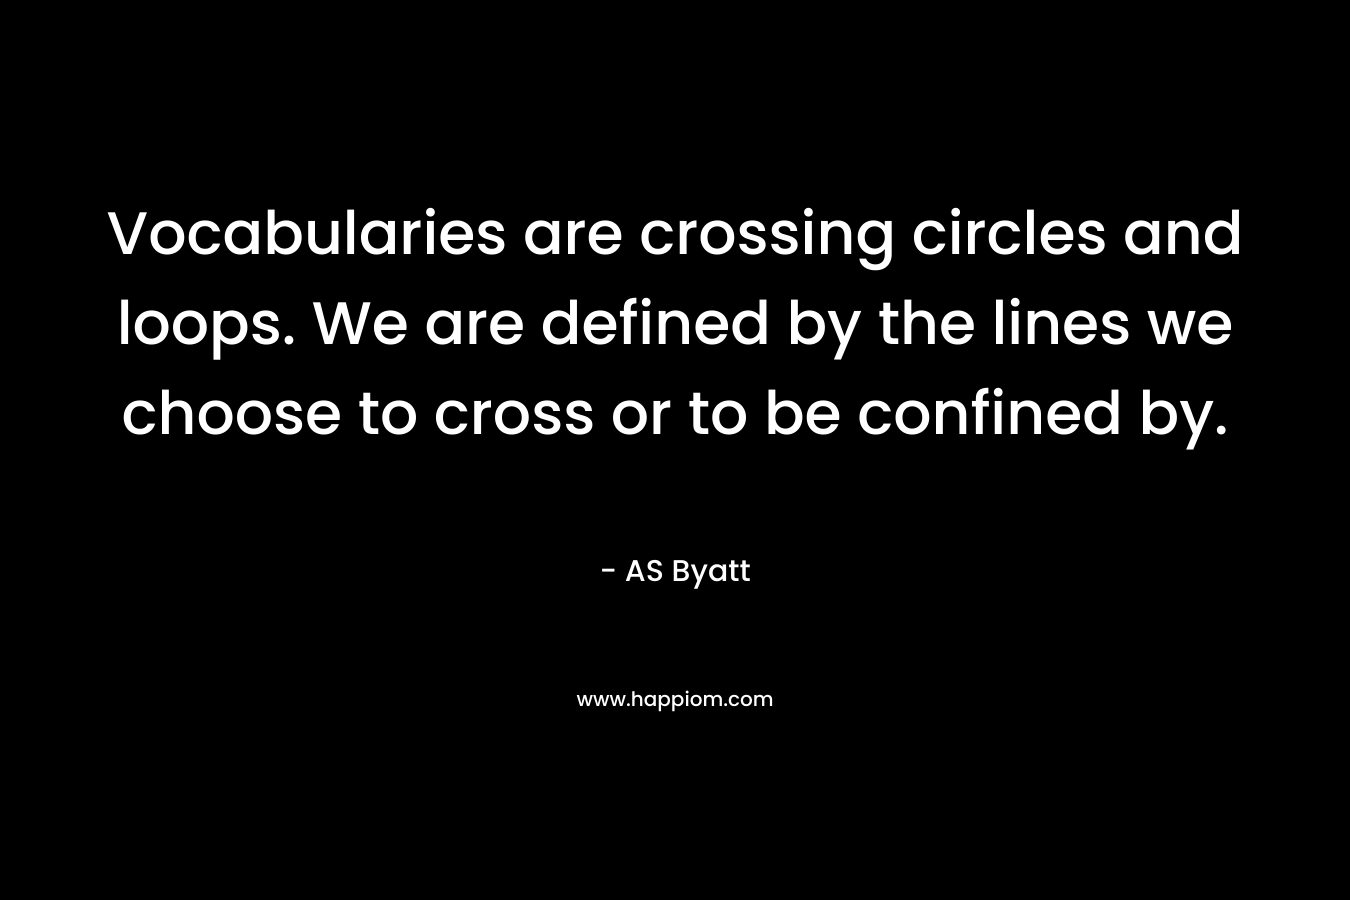 Vocabularies are crossing circles and loops. We are defined by the lines we choose to cross or to be confined by. – AS Byatt